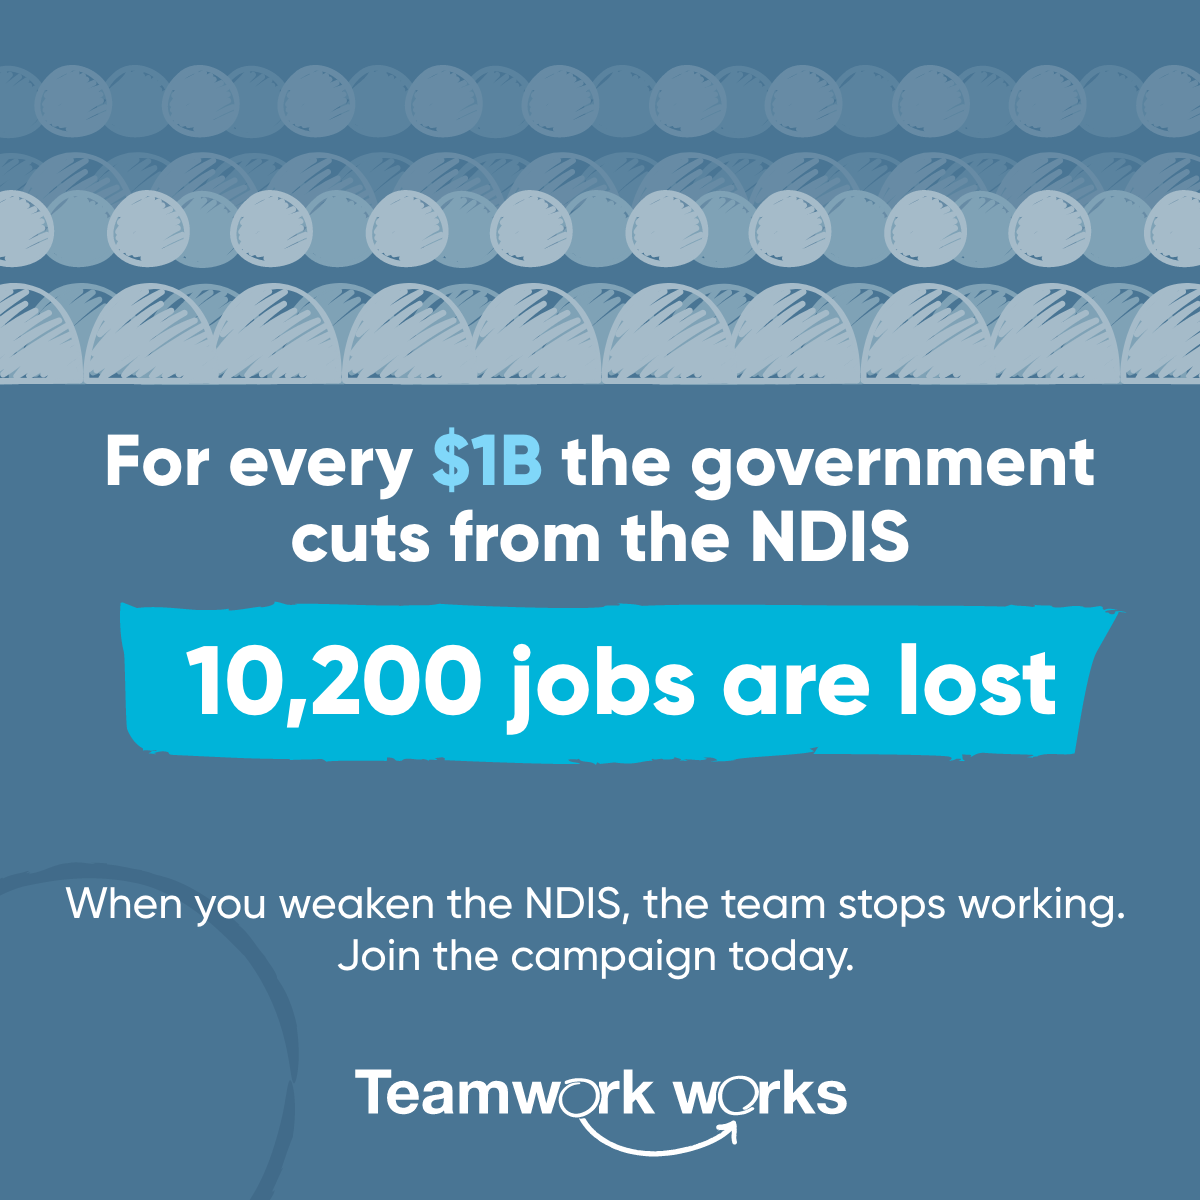 Social media sharegraphic showing for every $1B the government cuts from the NDIS, 10200 jobs are lost